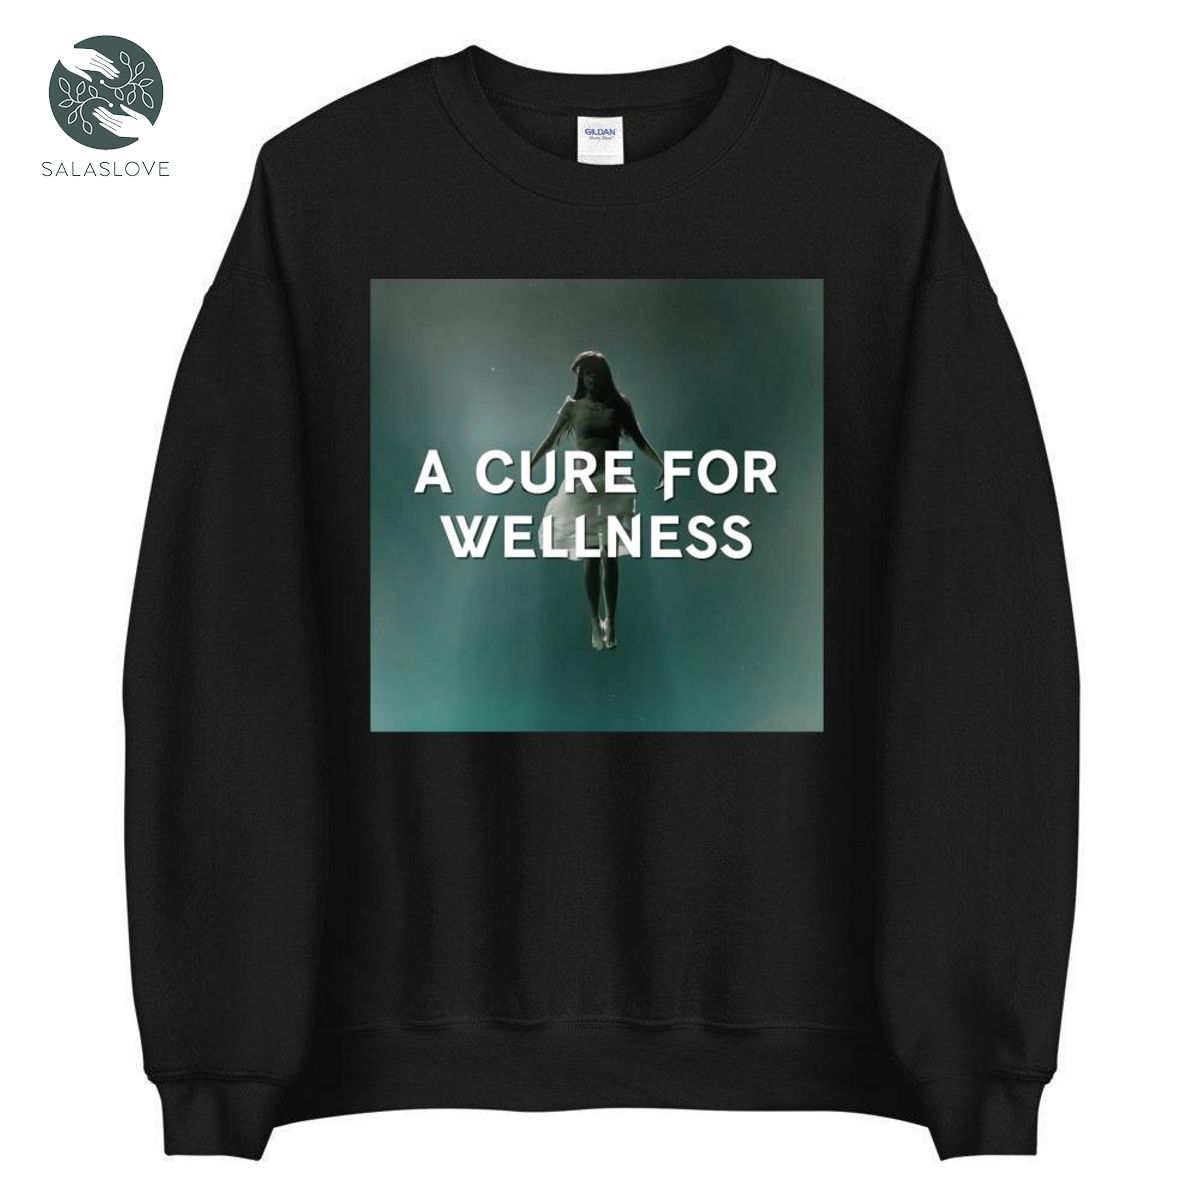 Mia Goth A Cure for Wellness Movie Hoodie